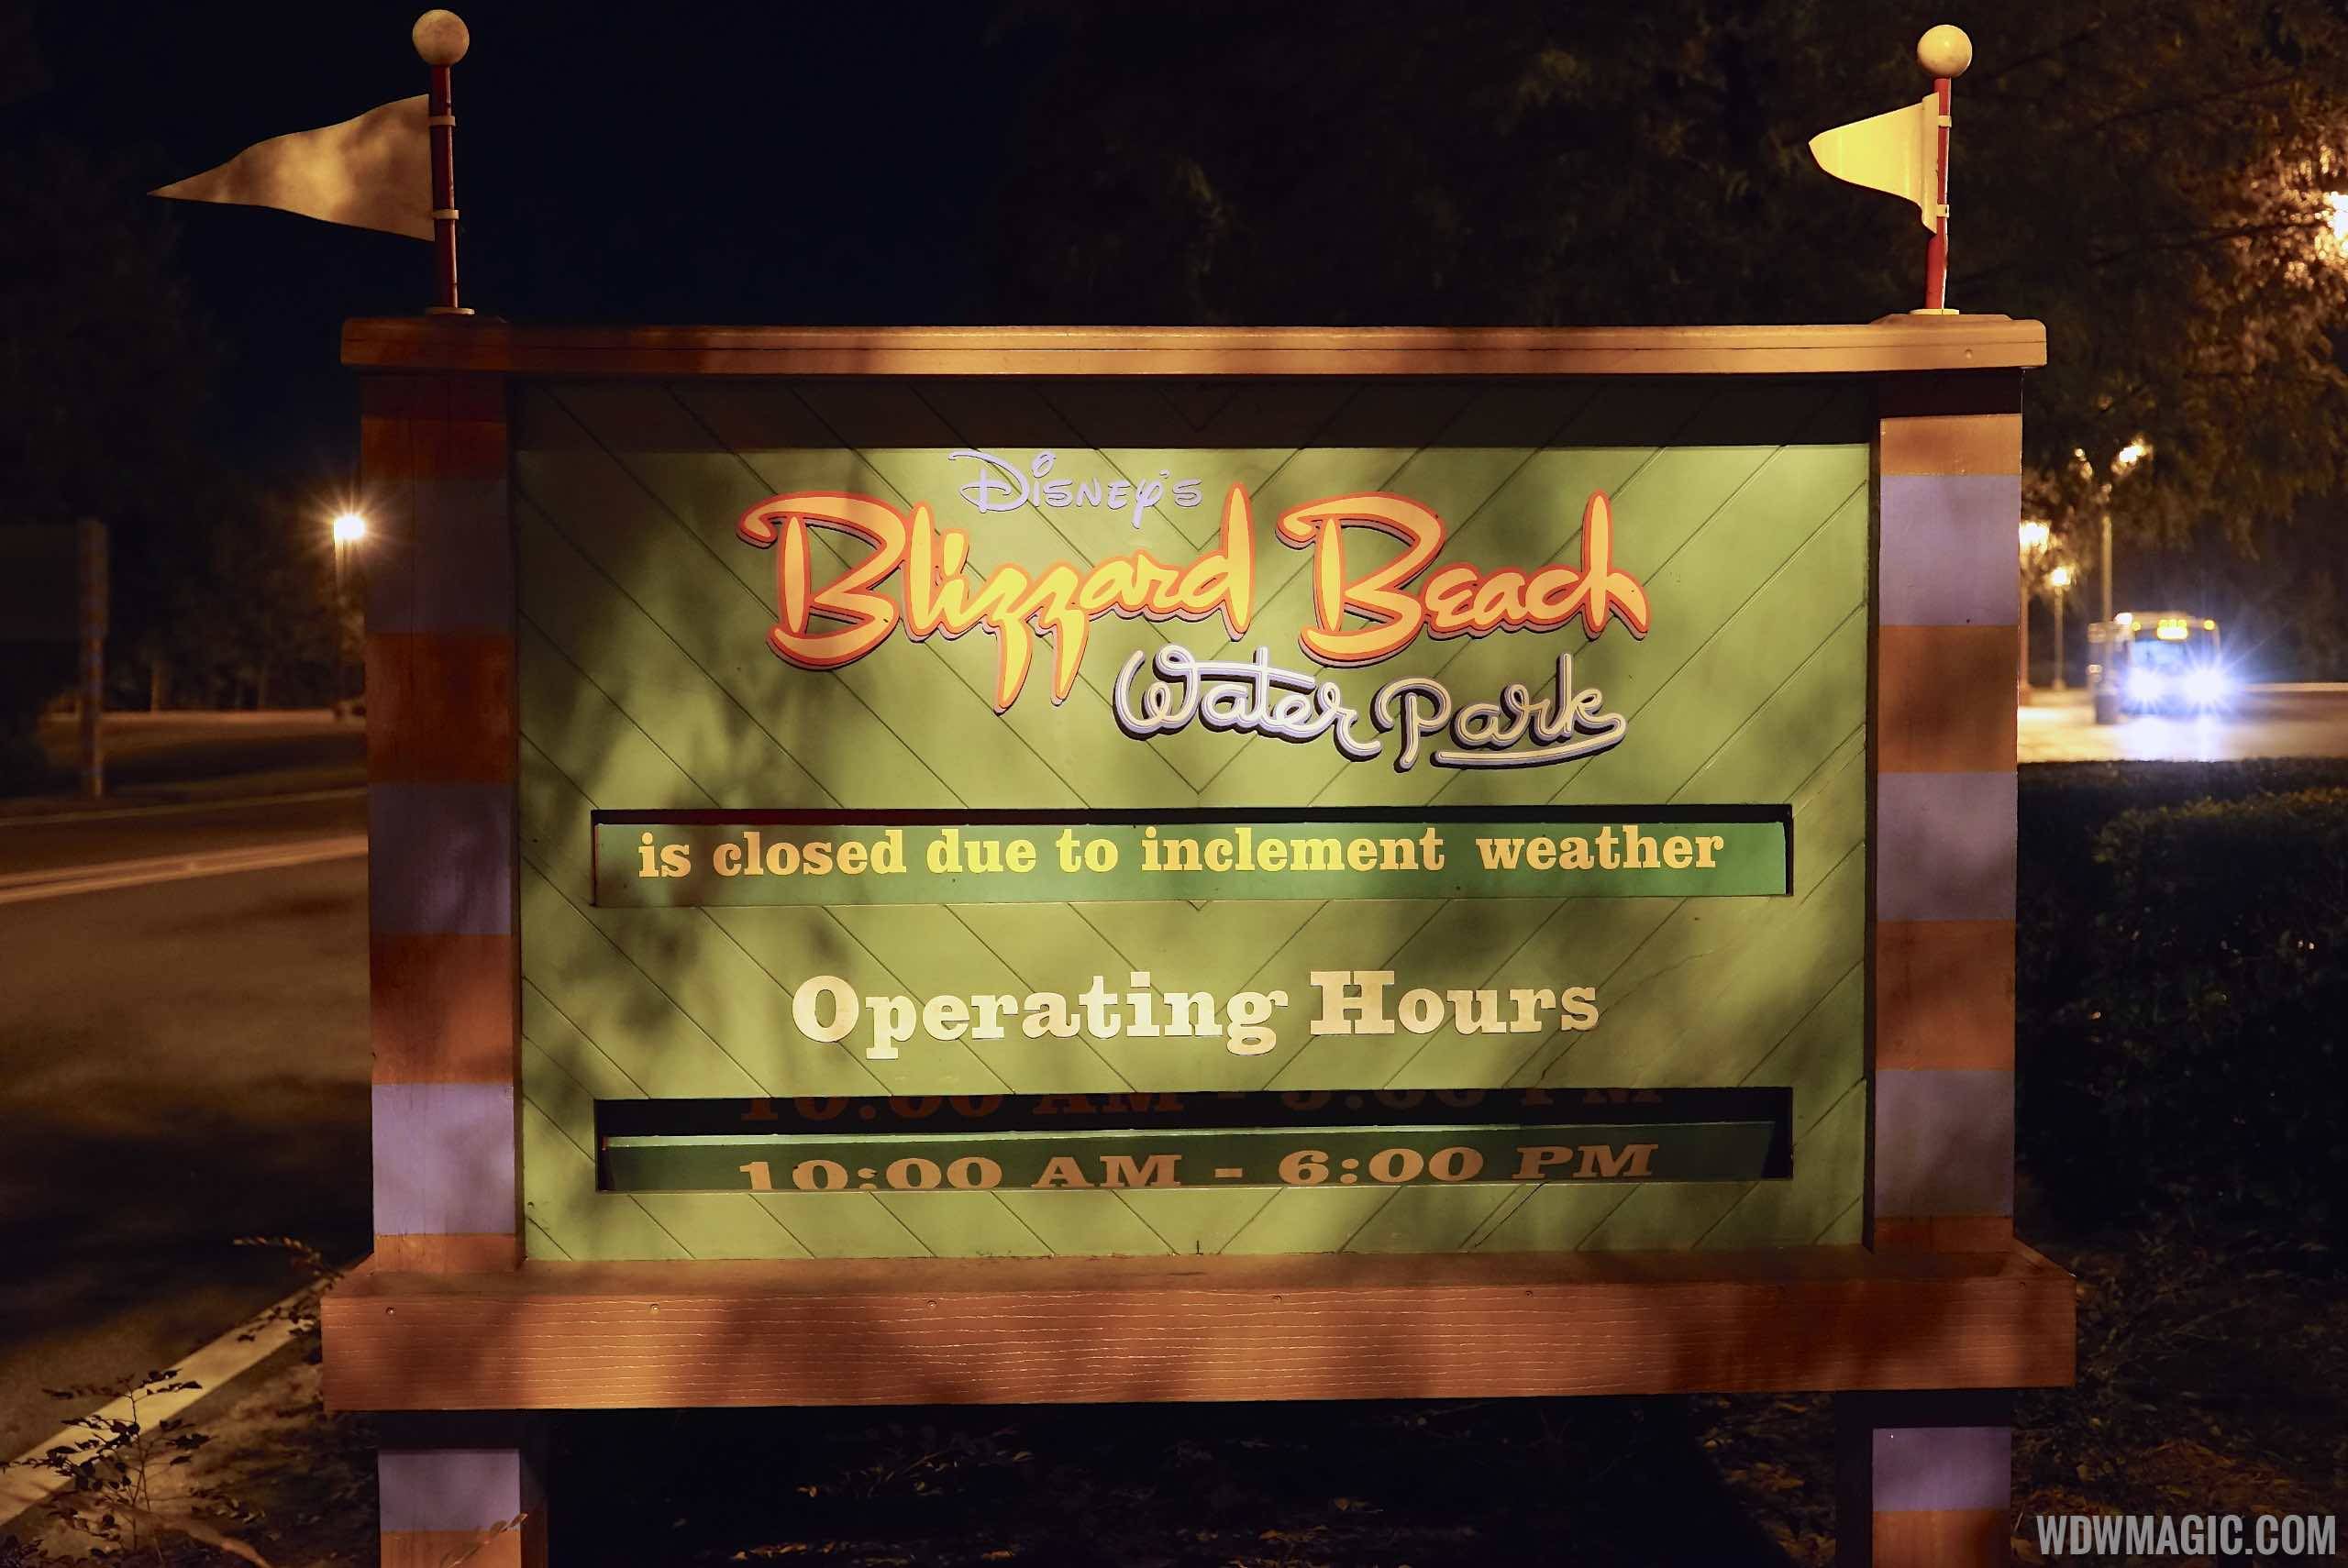 Blizzard Beach closed this weekend due to weather